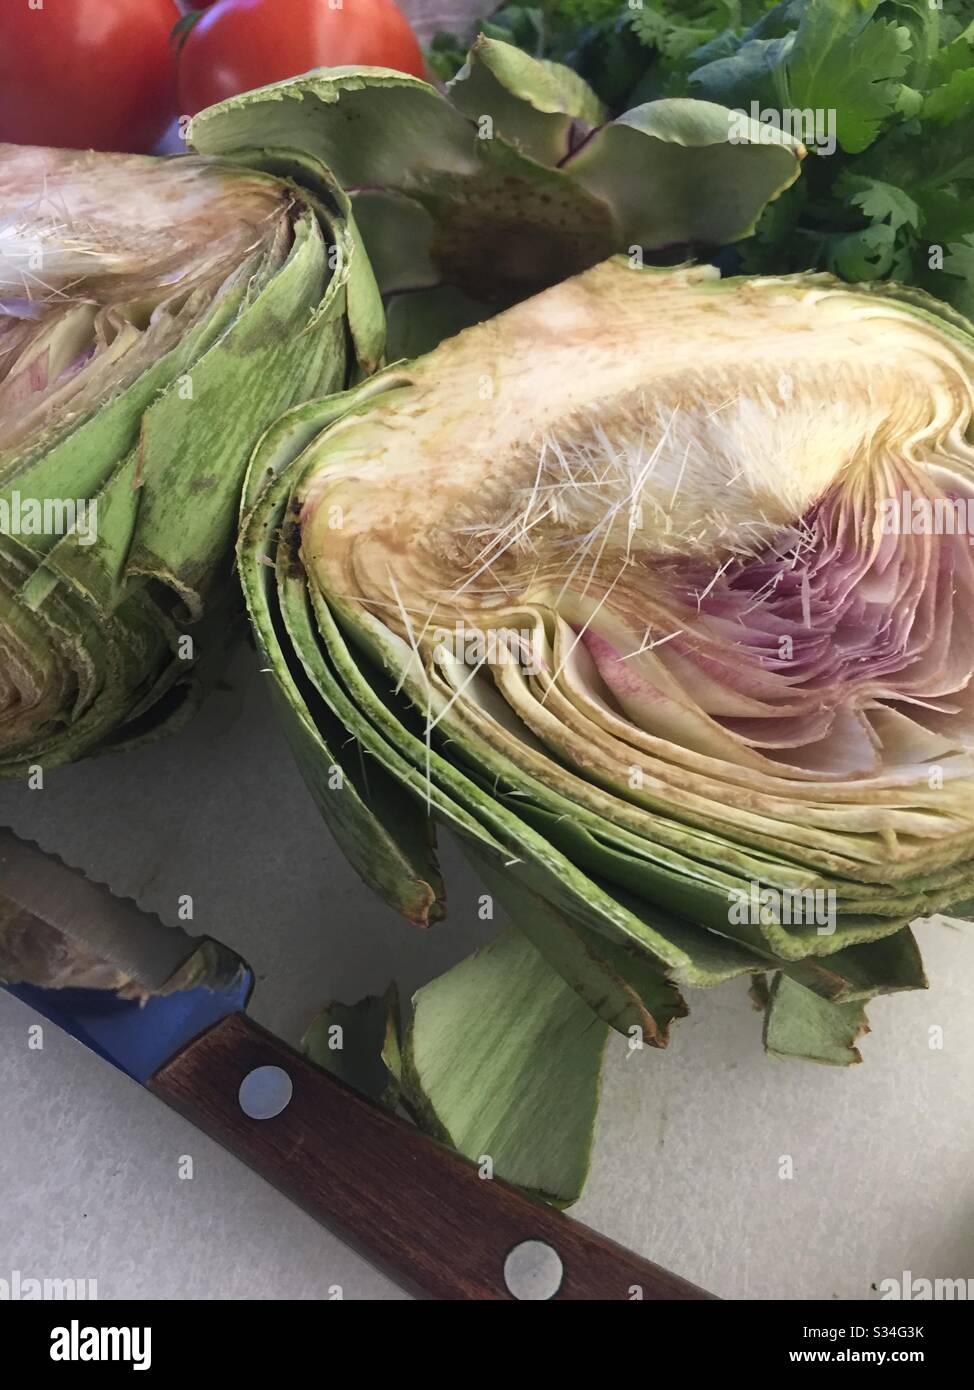 Close up of a cut in half large artichoke on a residential kitchen cutting board, USA Stock Photo